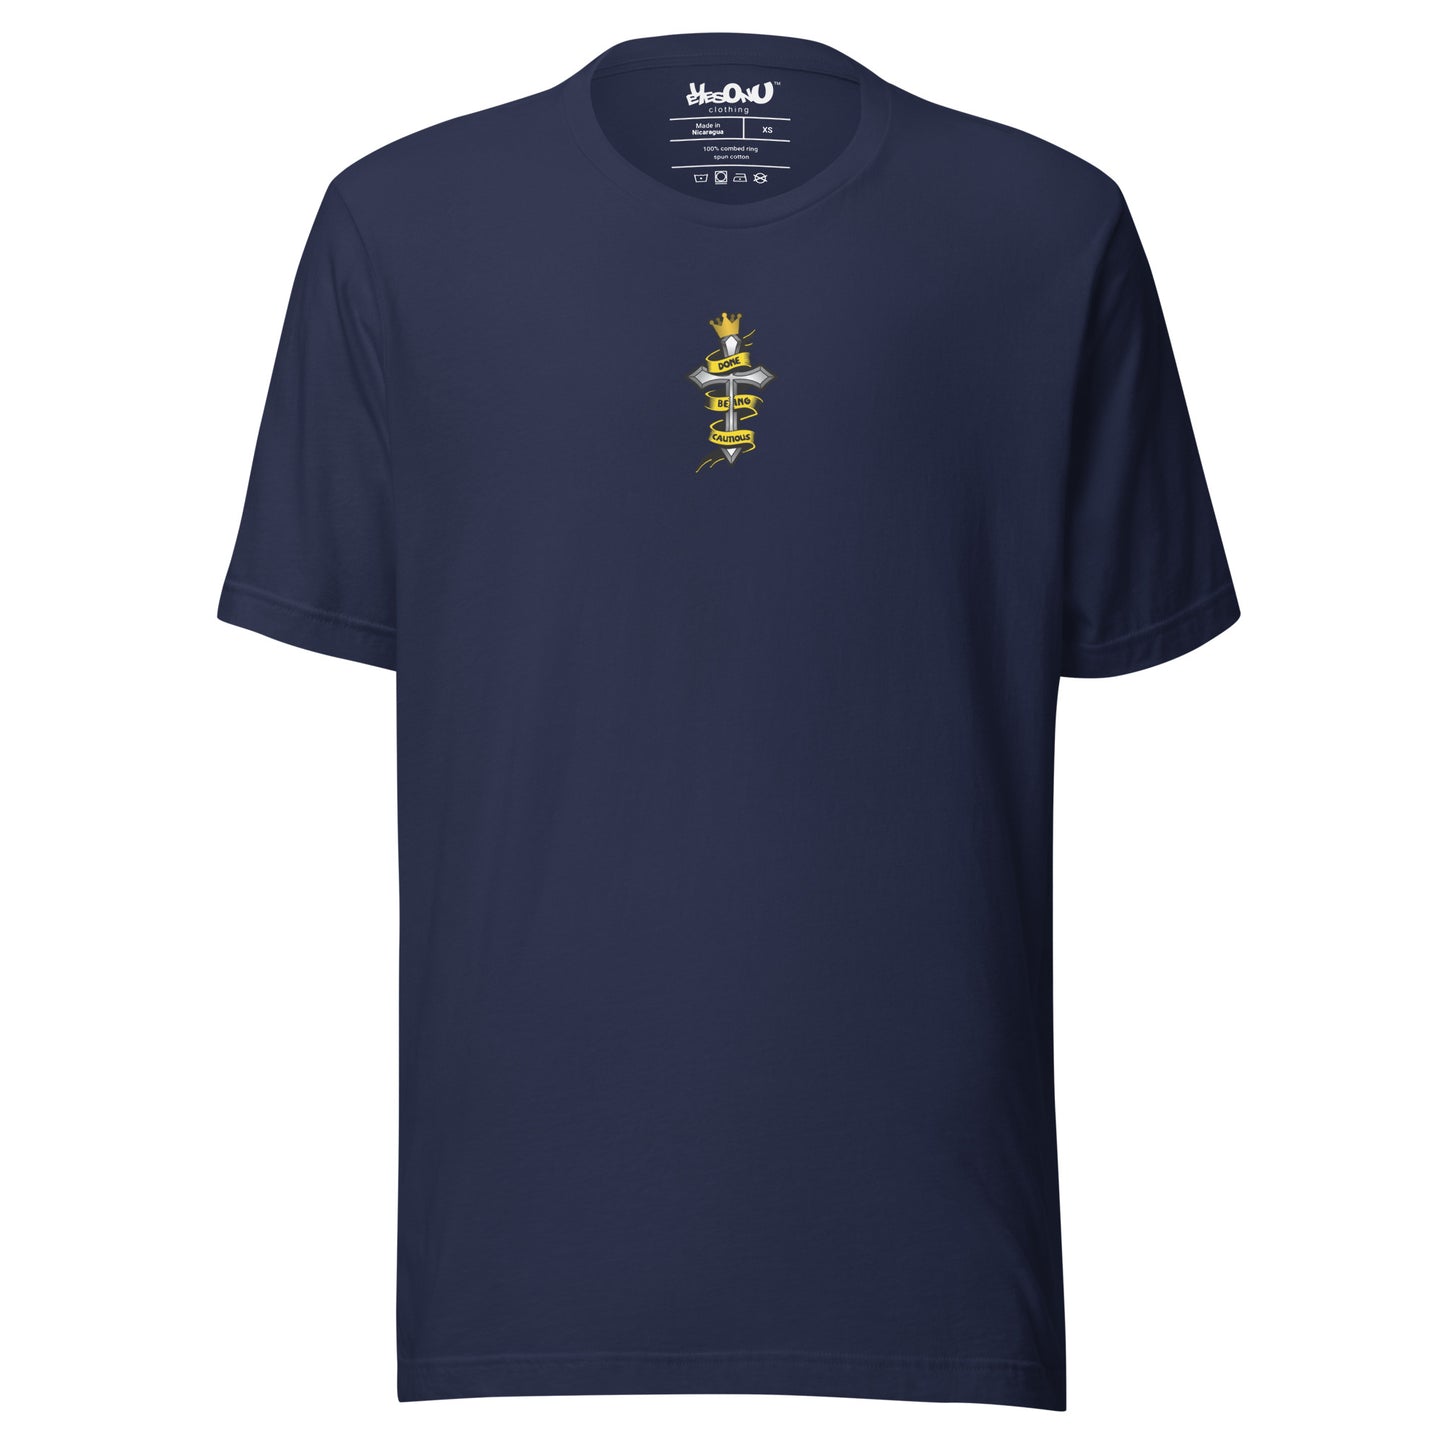 Done Being Cautious - Cross (2-sided) T-shirt (6 colors)